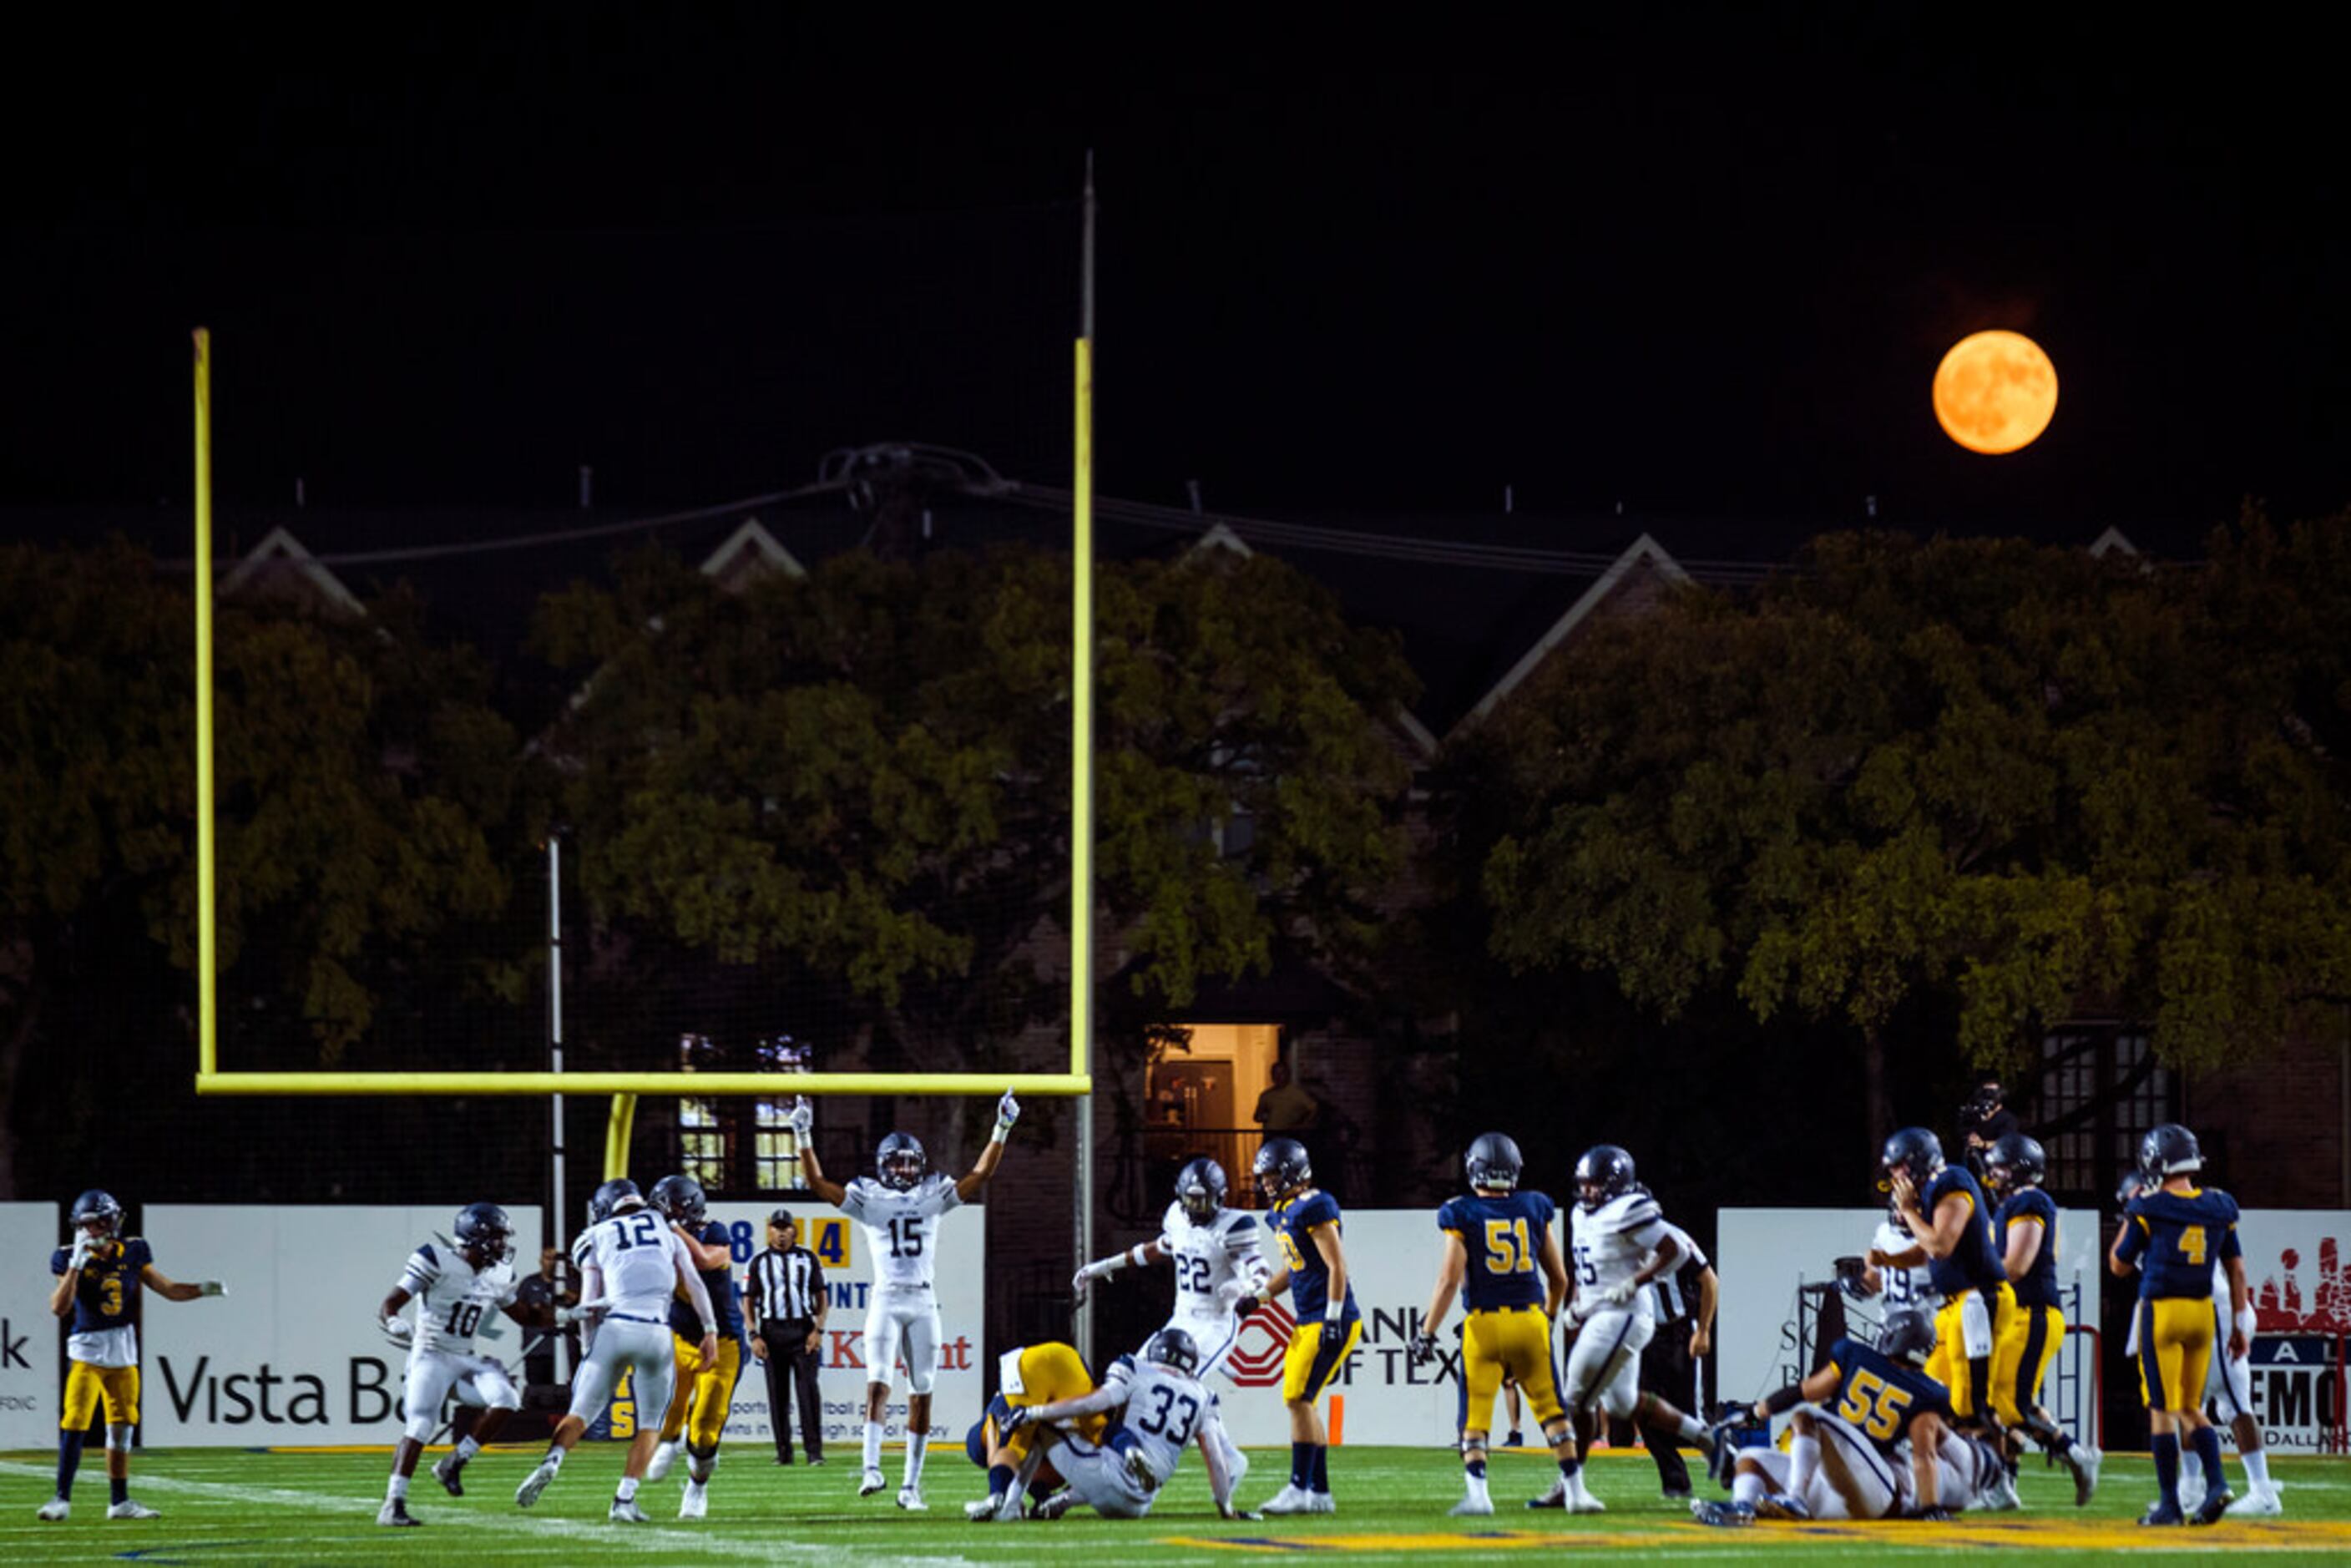 The full moon rises over he stadium as Frisco Lone Star faces Highland Park in a high school...